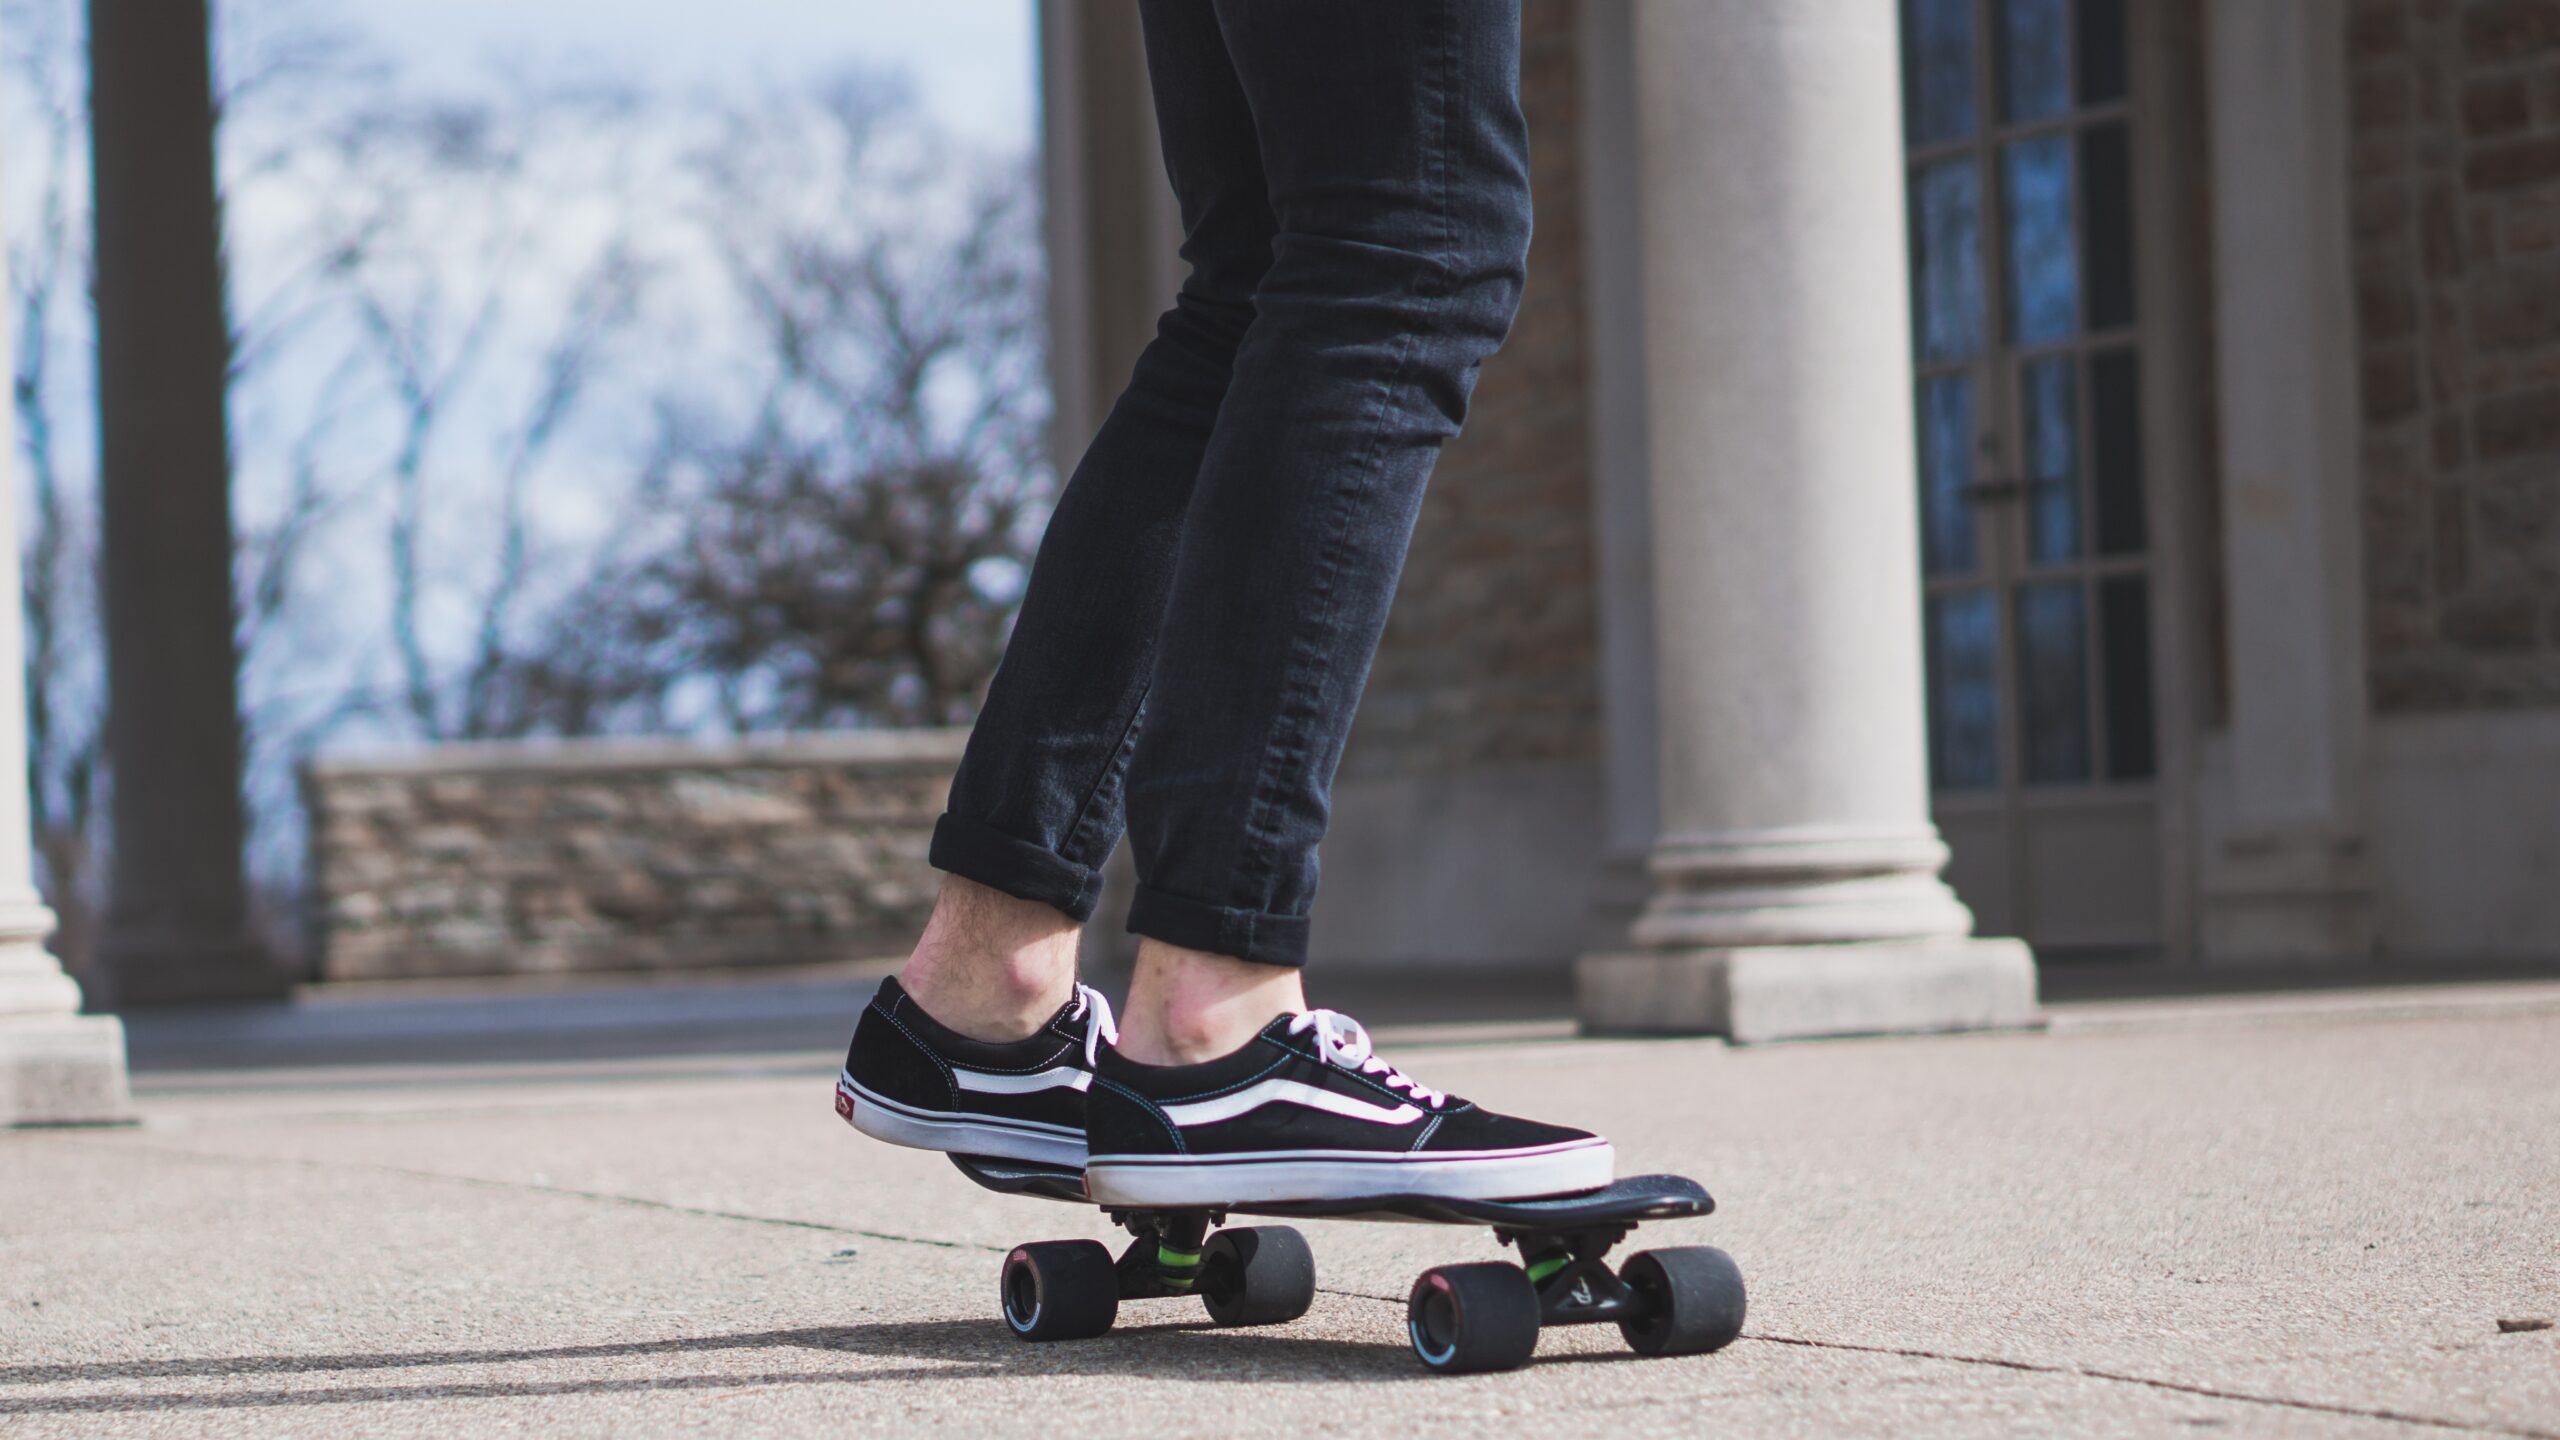 What Are The Key Considerations When Choosing Skateboard Wheels (size, Hardness)?